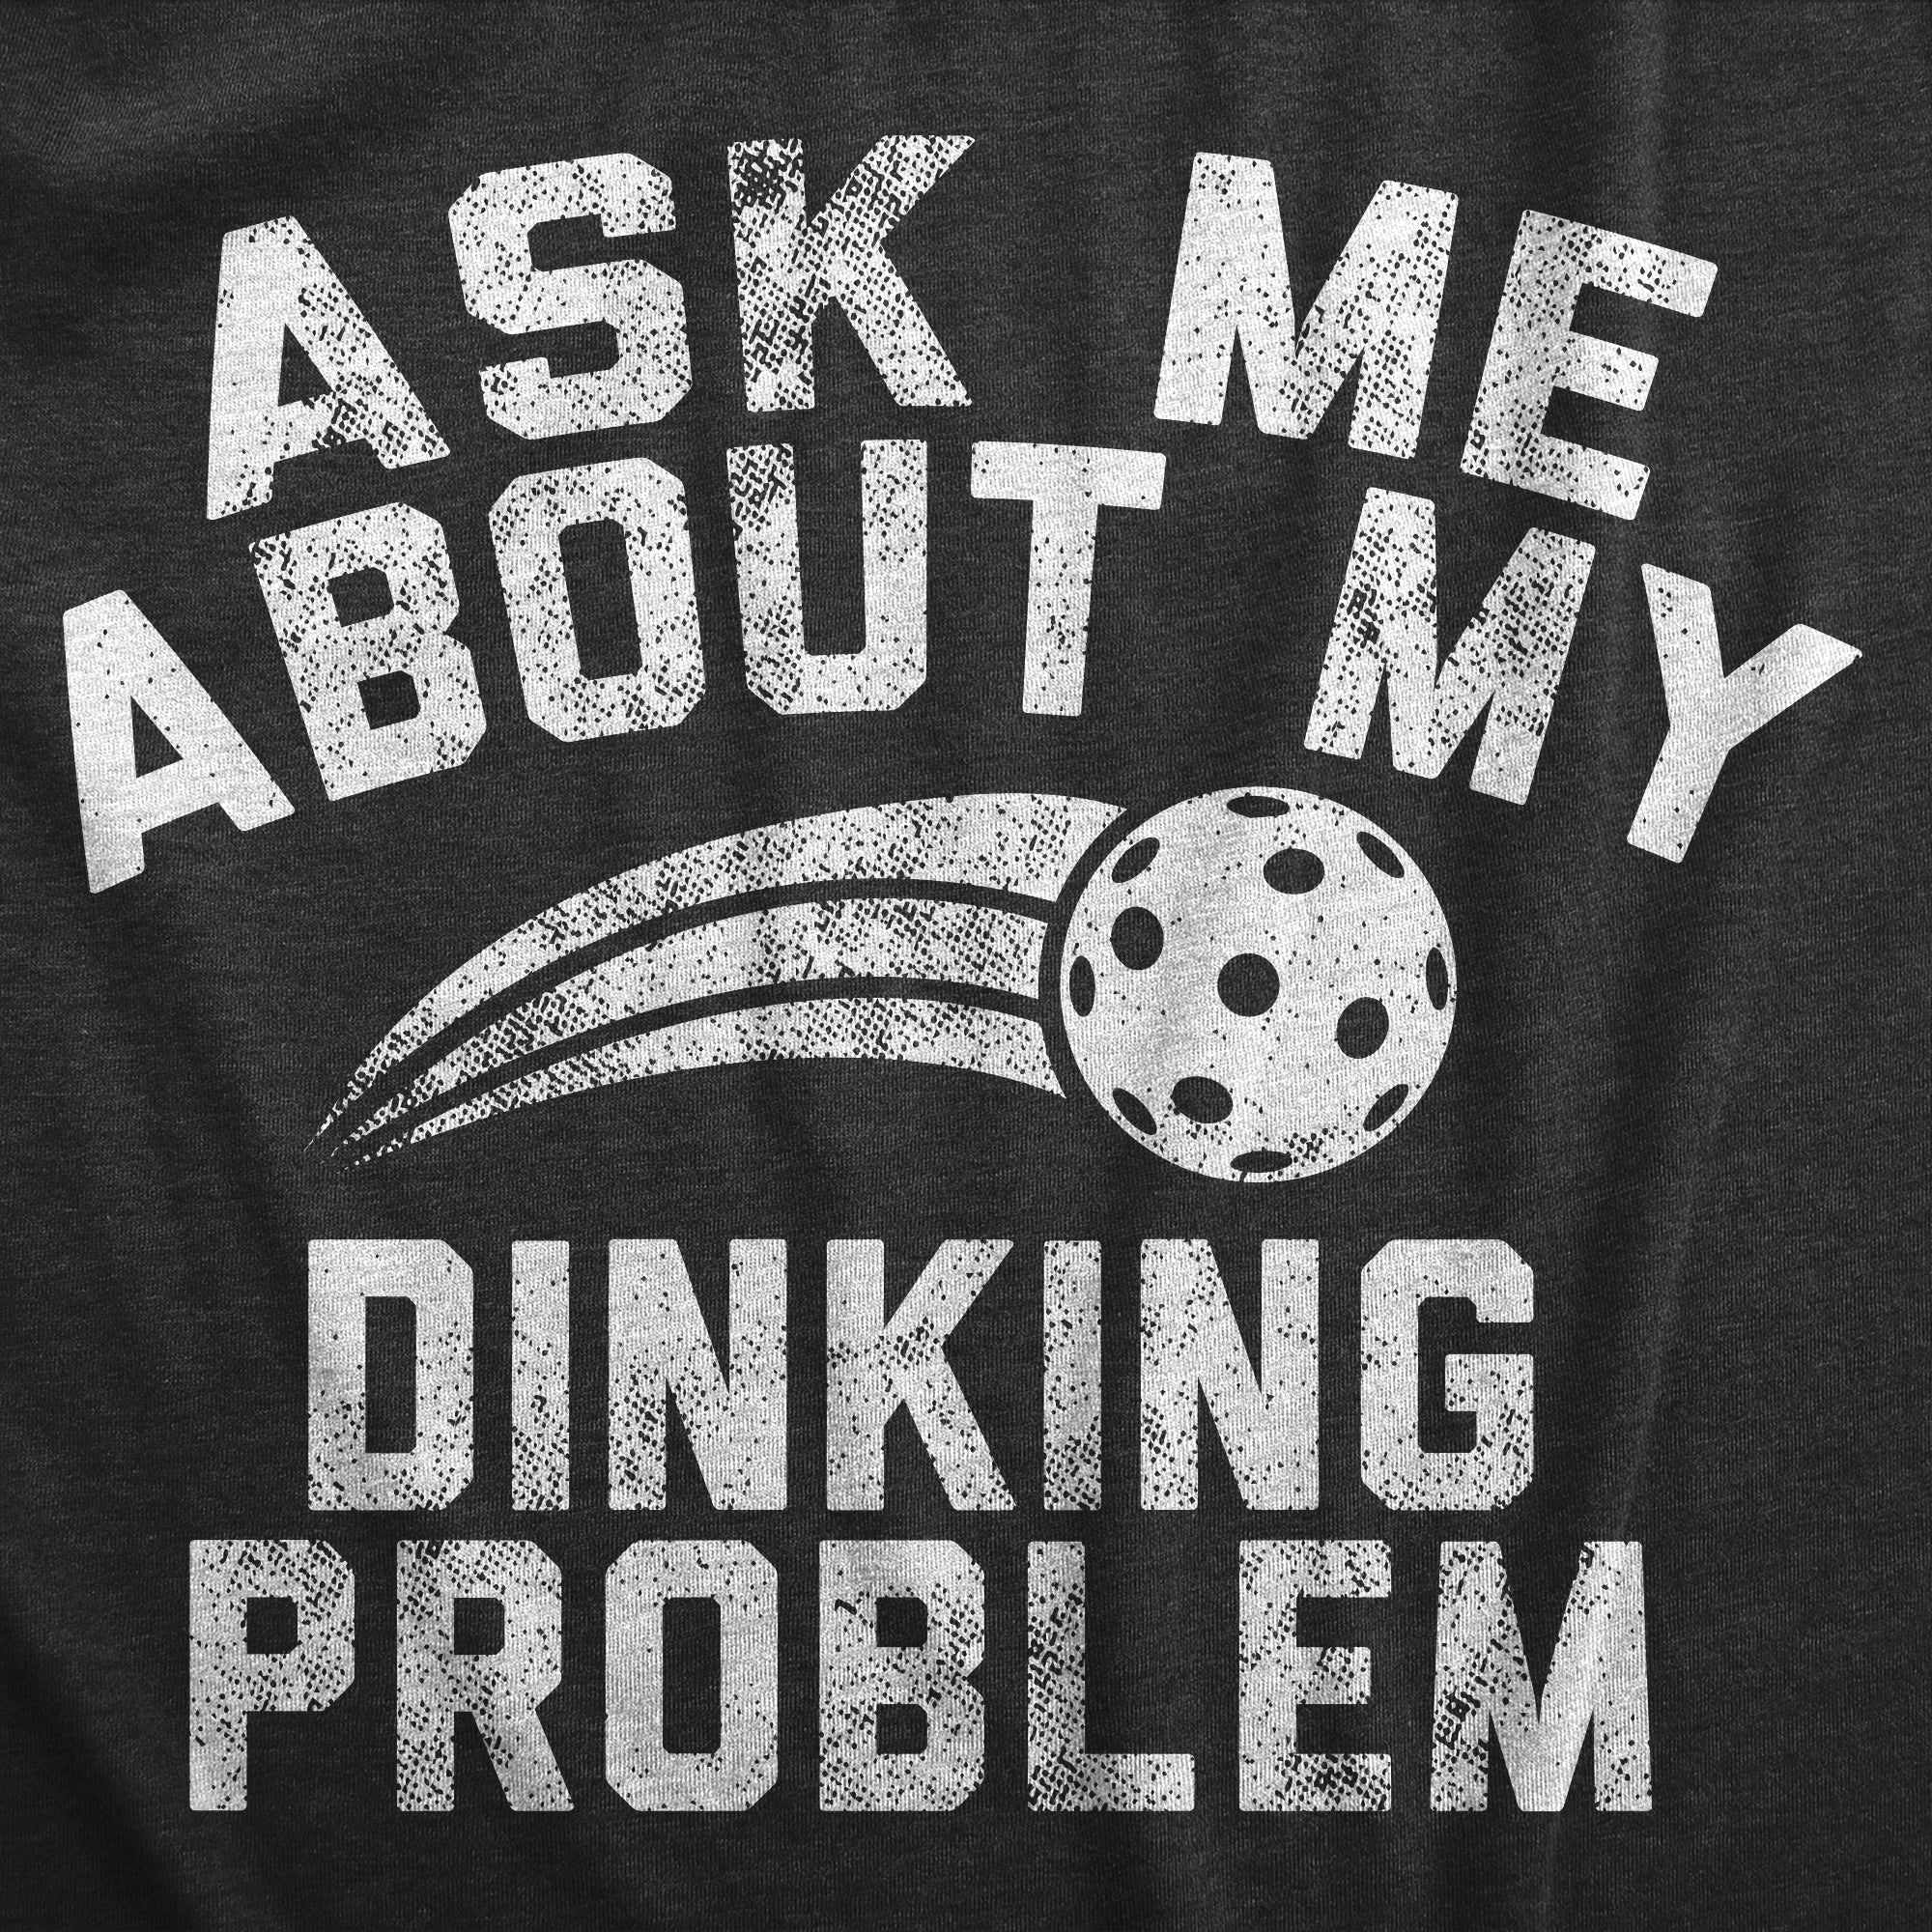 Funny Heather Black - DINKING Ask Me About My Dinking Problem Womens T Shirt Nerdy Sarcastic Tee